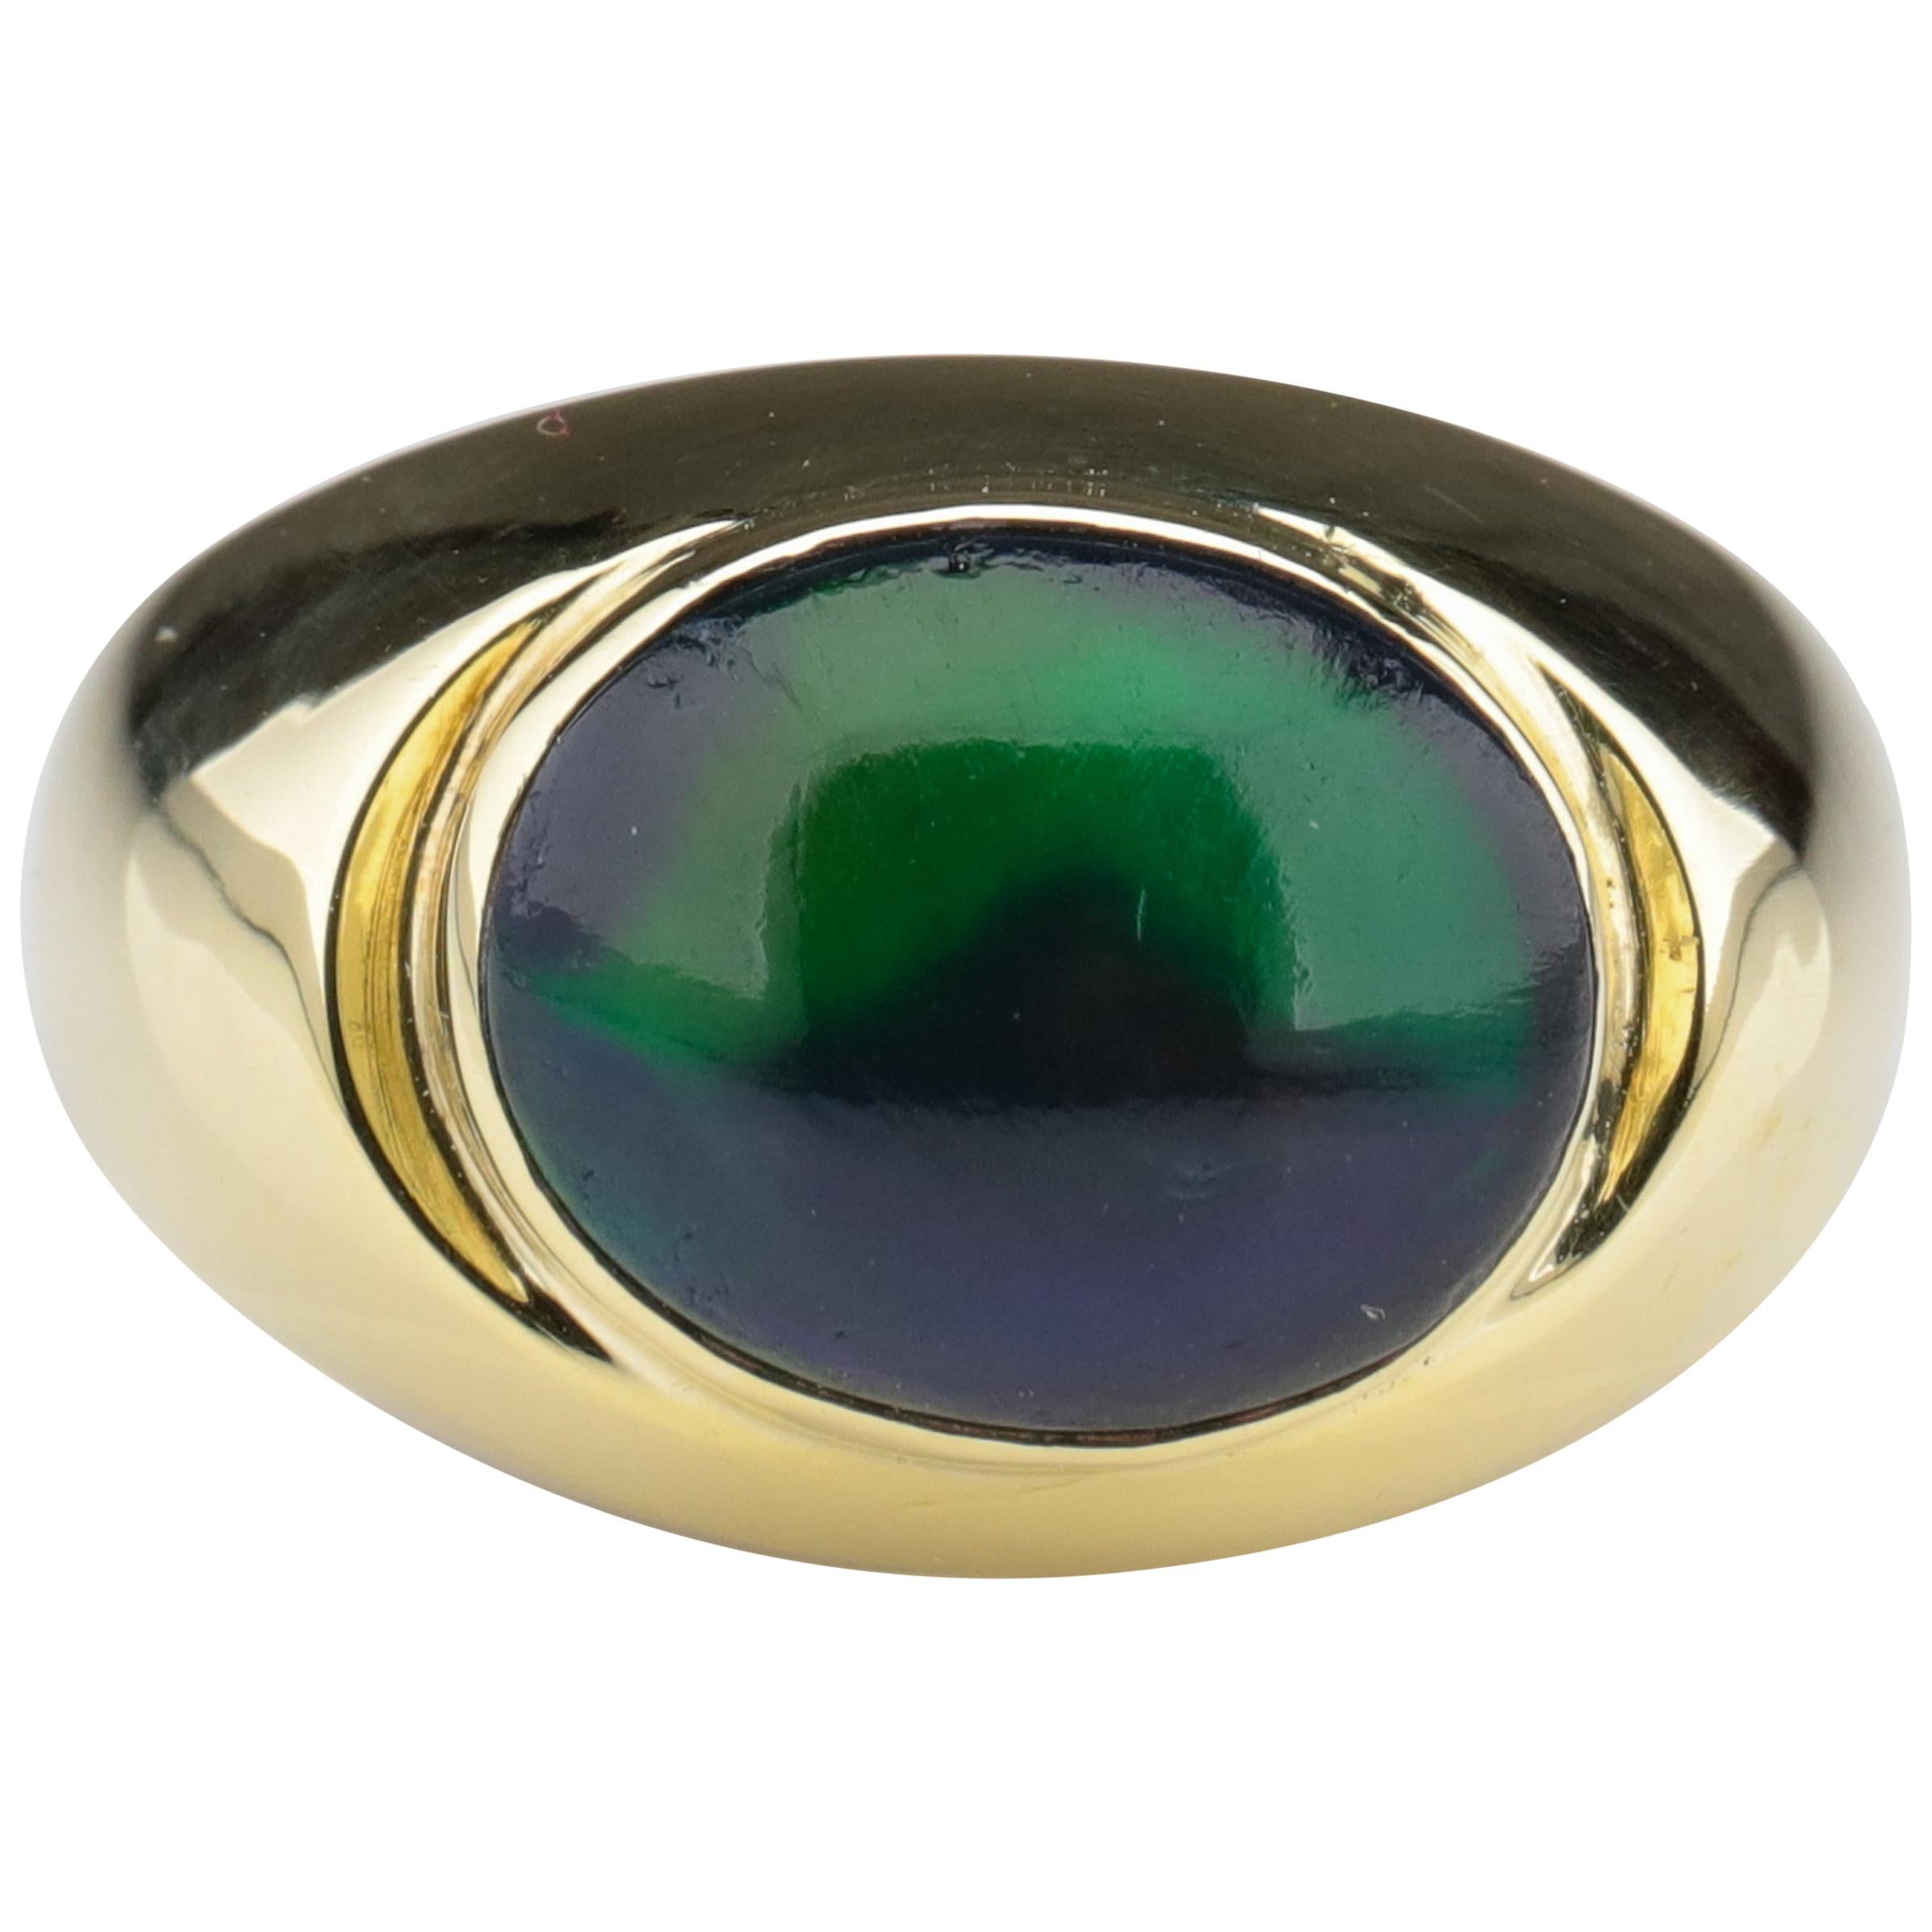 Black Opal Ring from Lightning Ridge is Understated Until It's Not